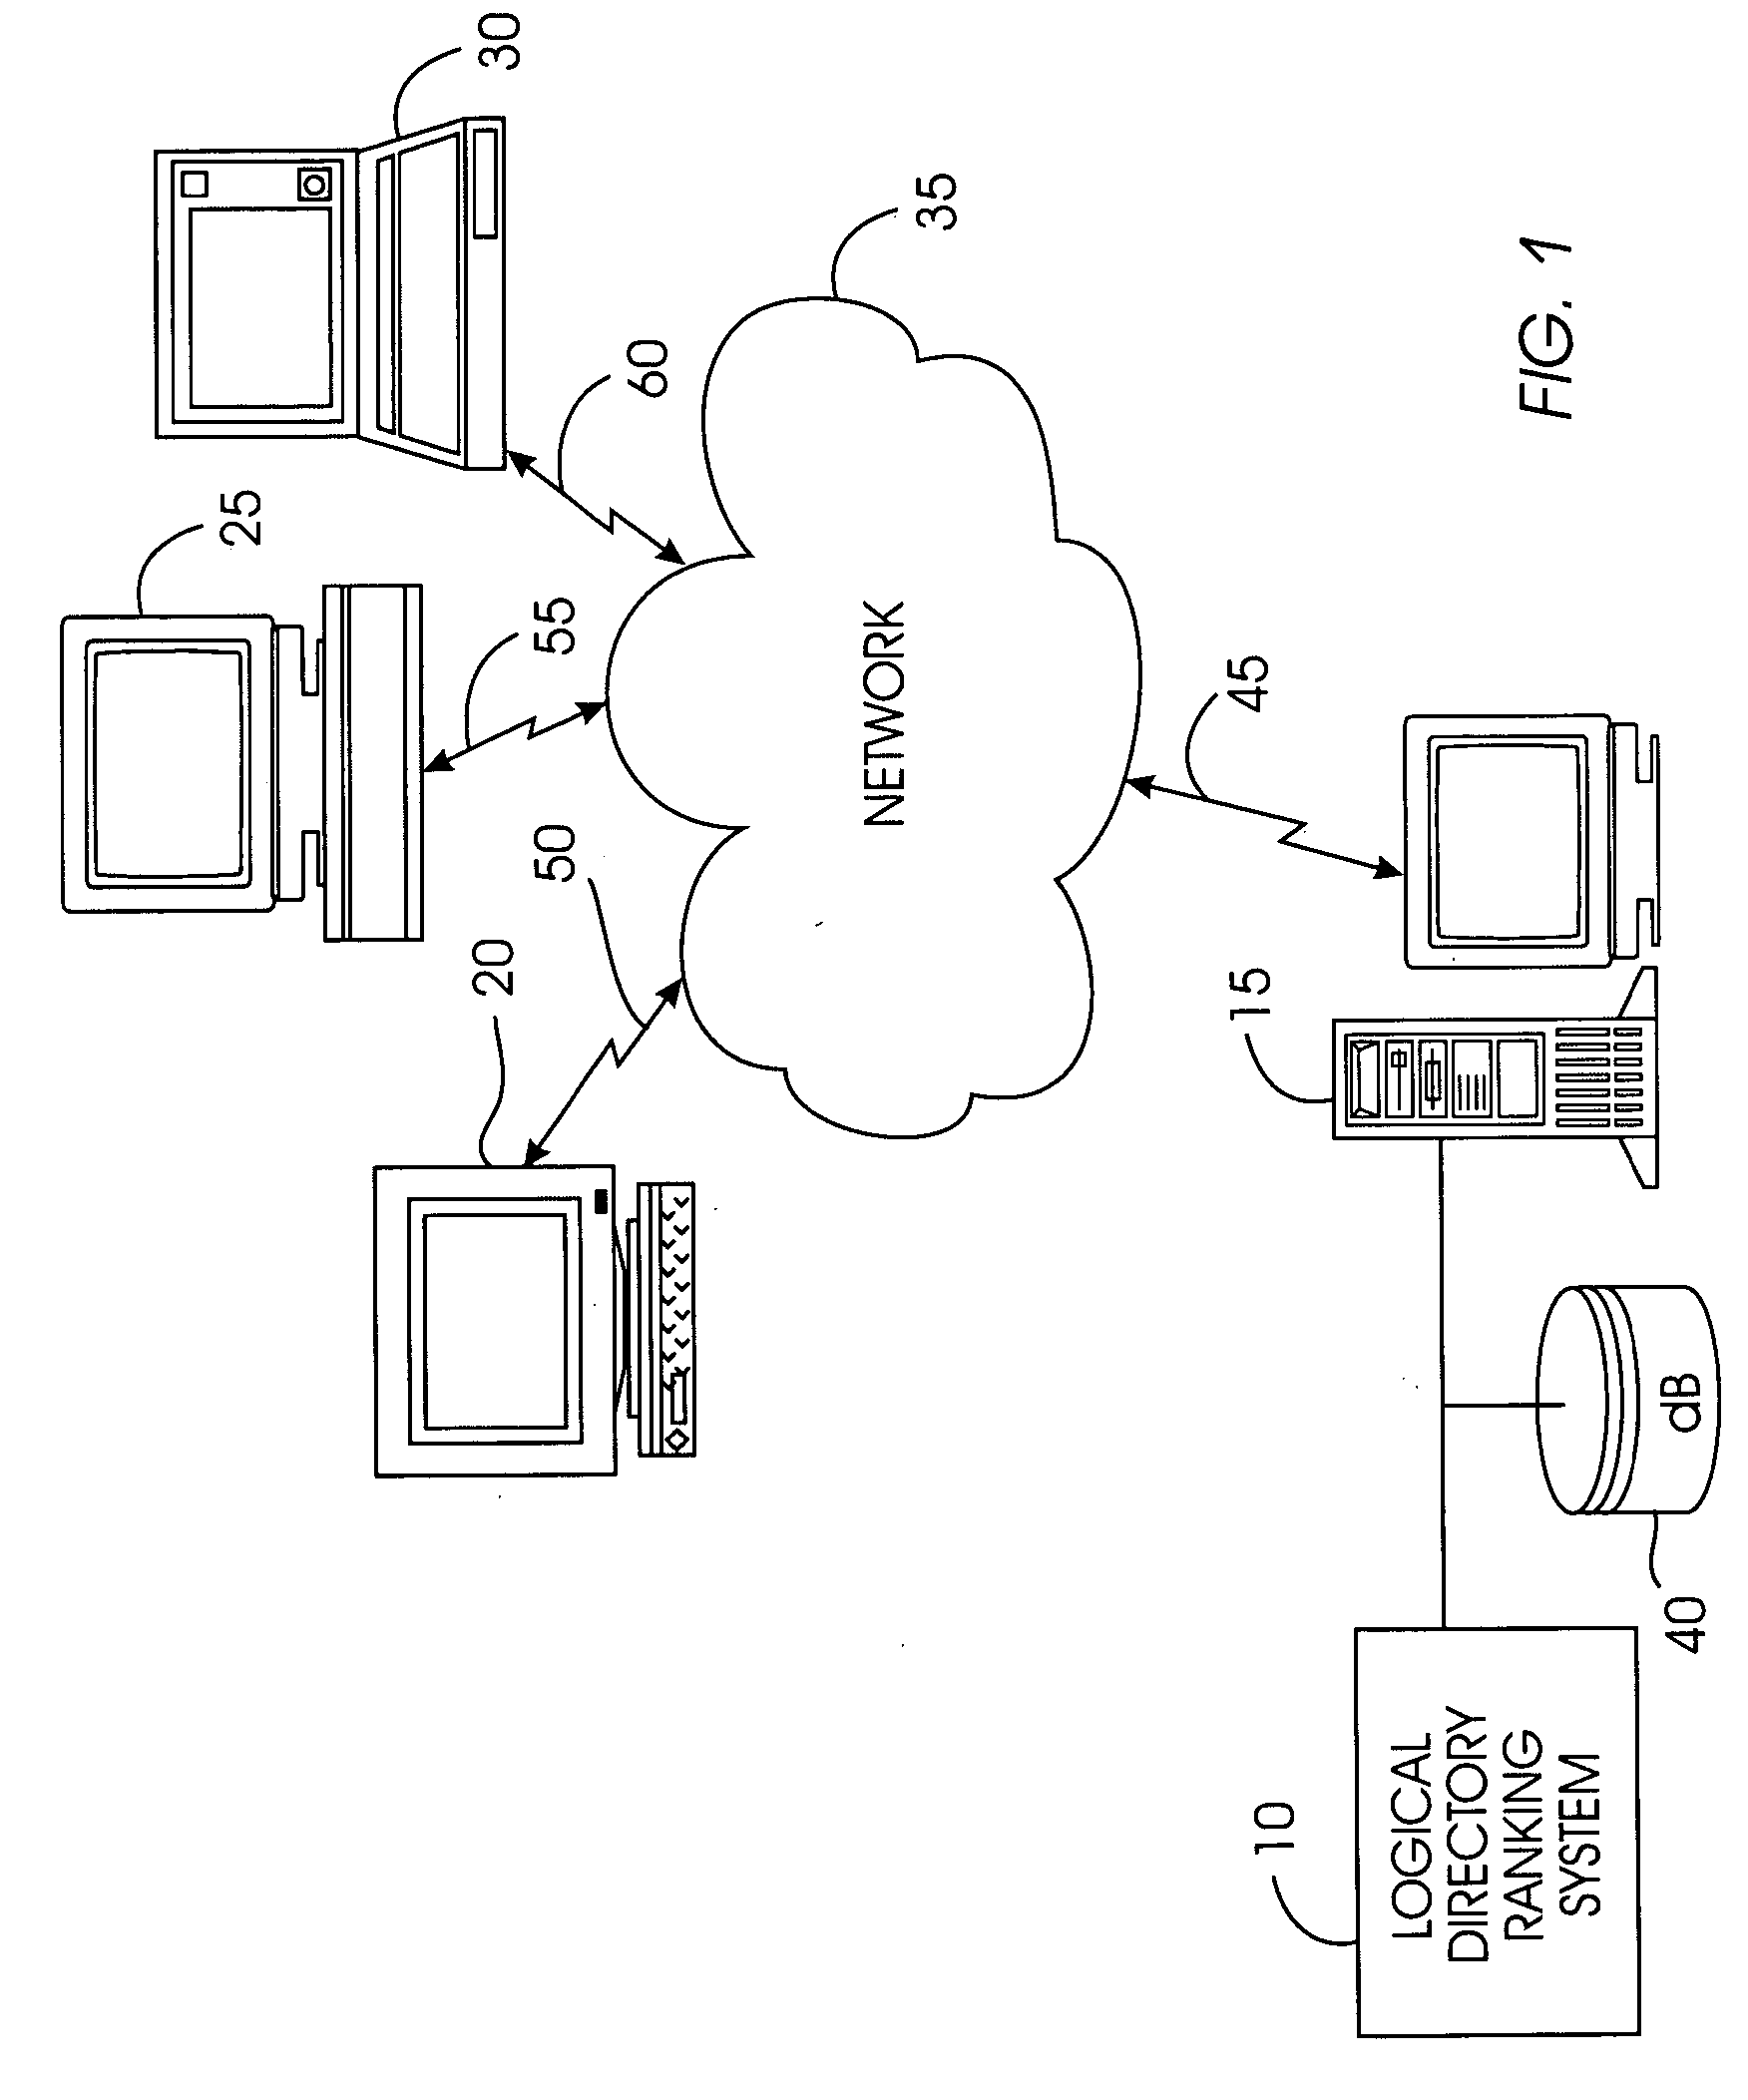 System and method for ranking logical directories